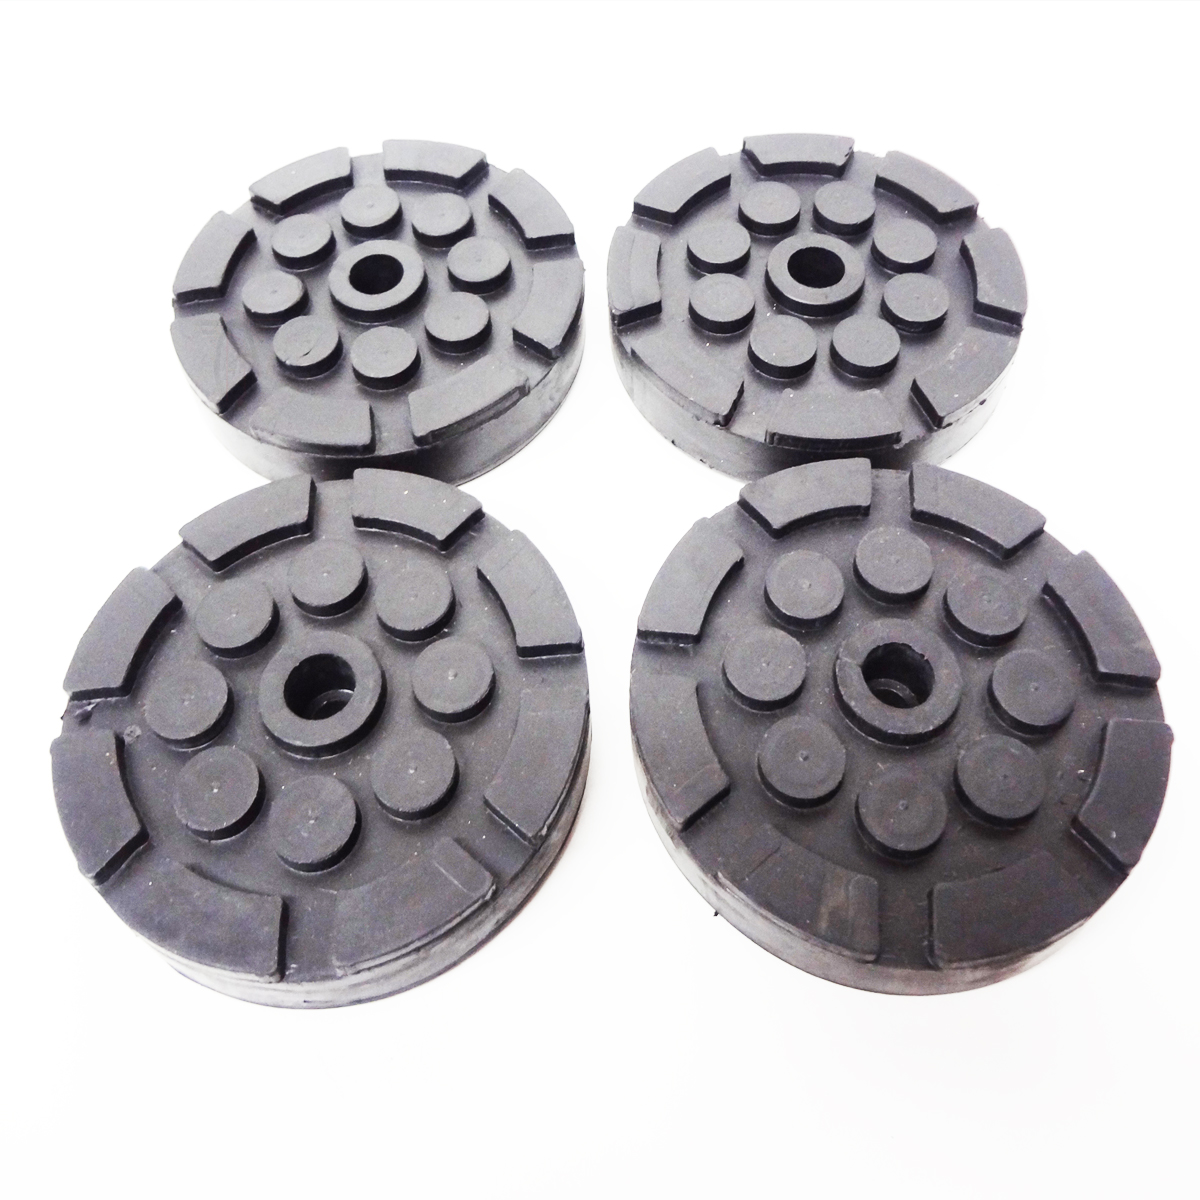 QUALITY LIFT ROUND RUBBER PADS for OLDER STYLE